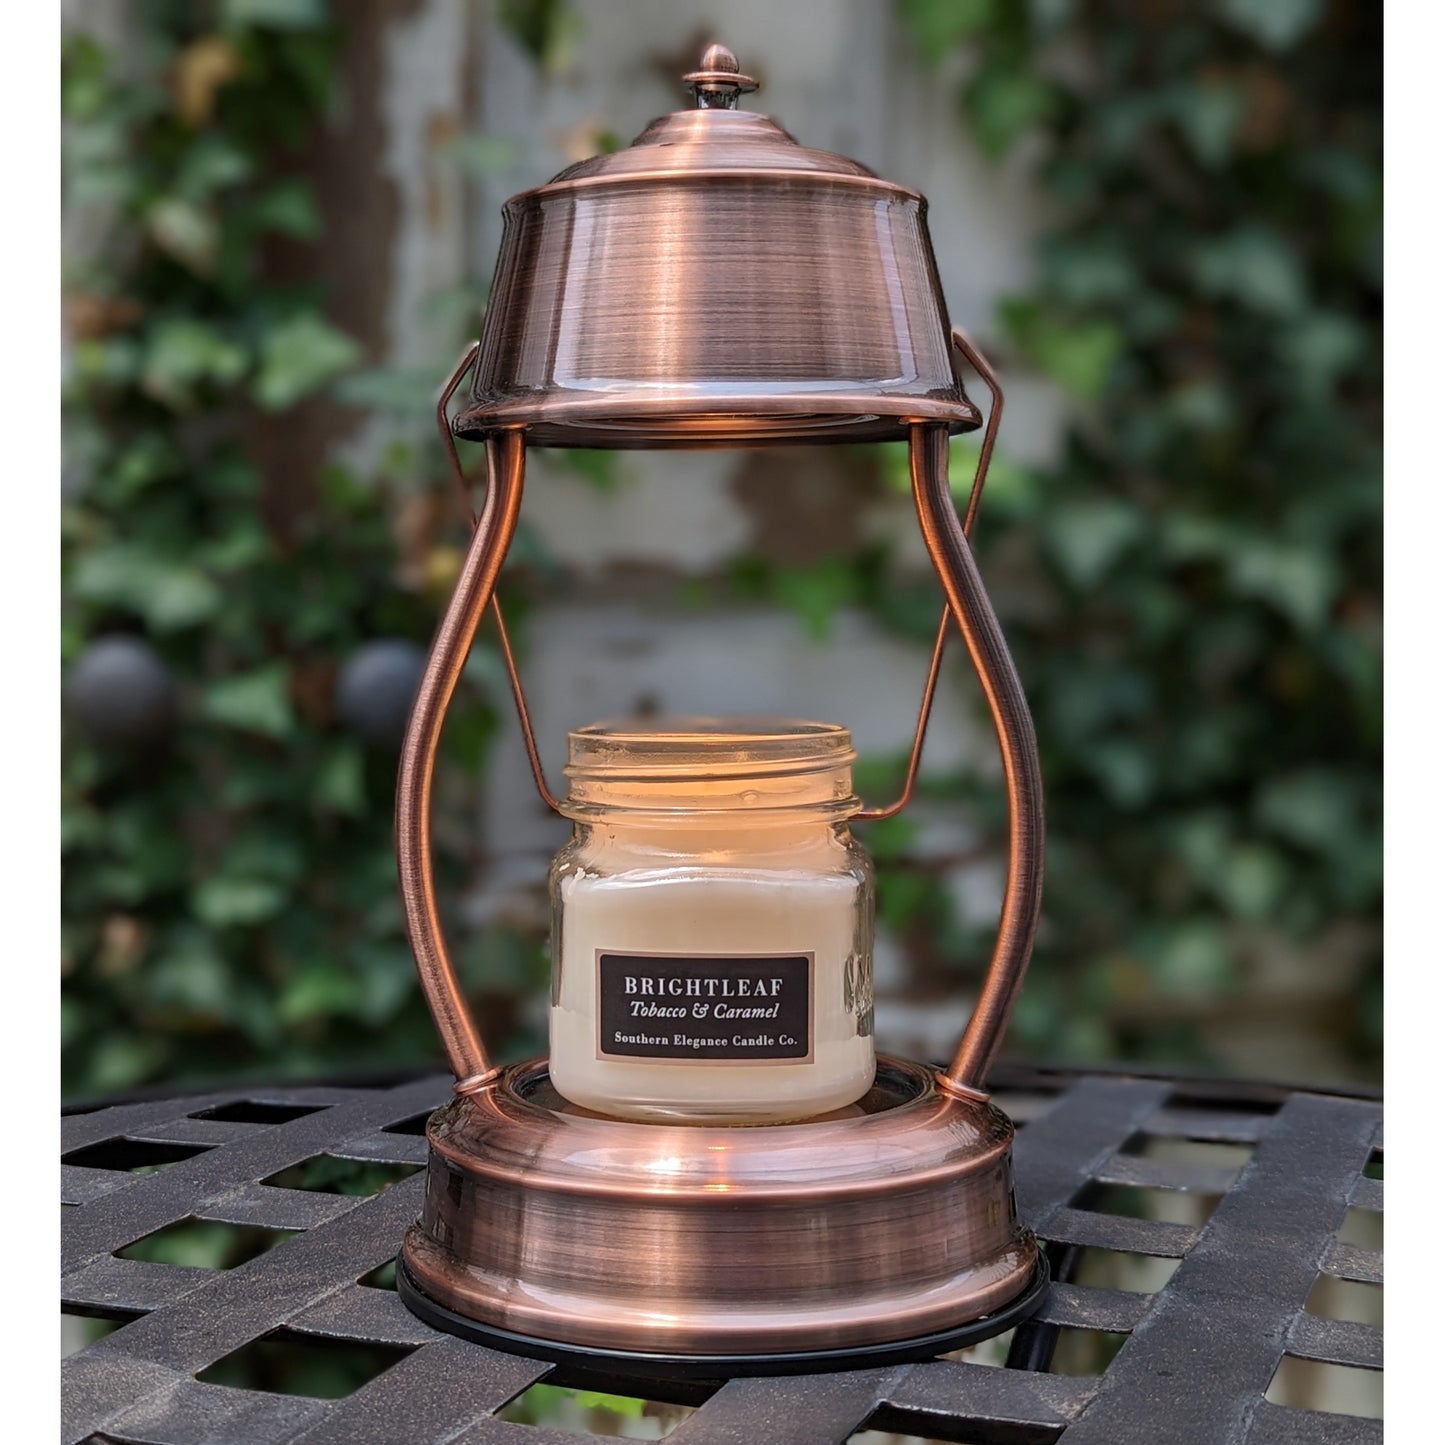 Image, lit copper candle warmer on outdoor wrought iron table.